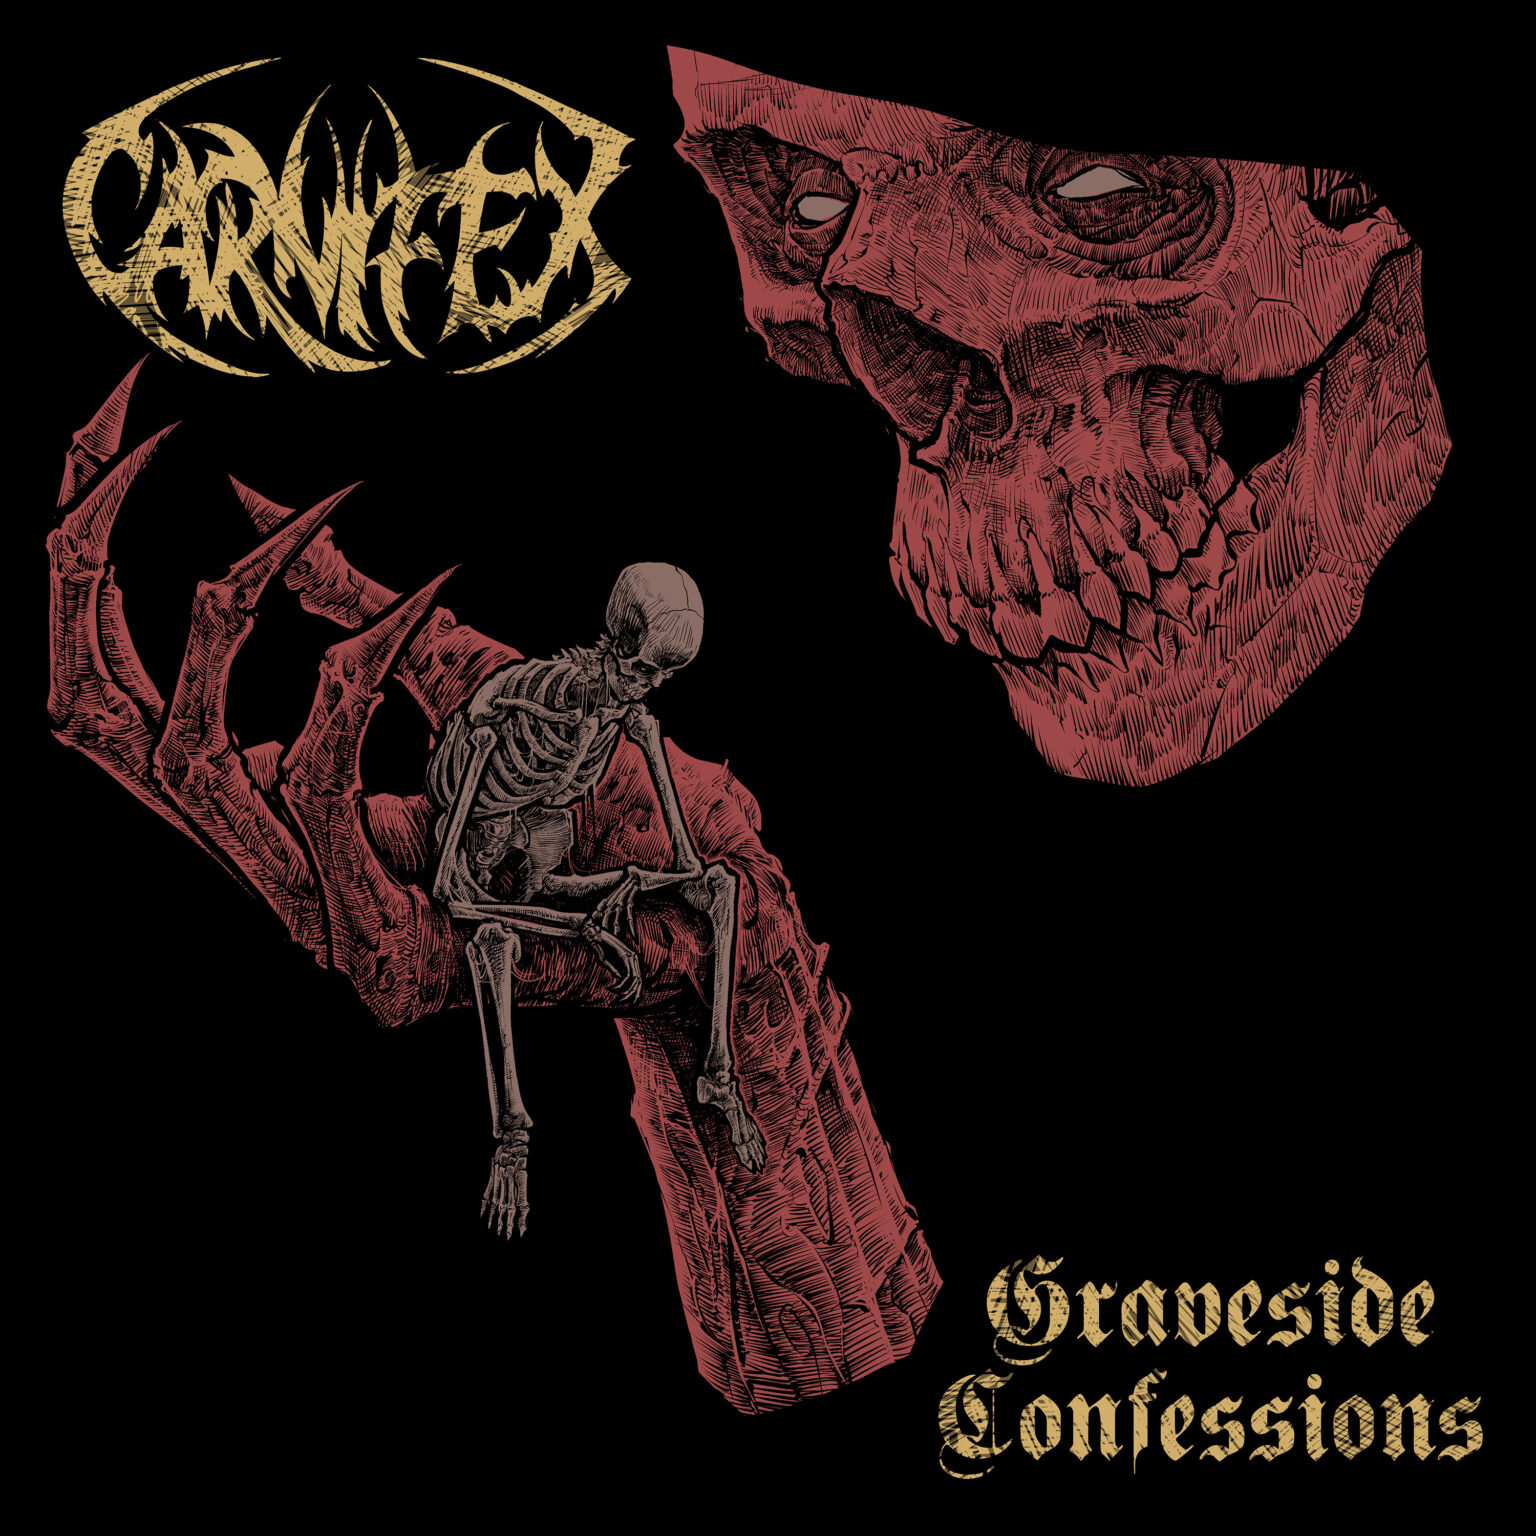 Carnifex to release new album "Graveside Confessions" in September